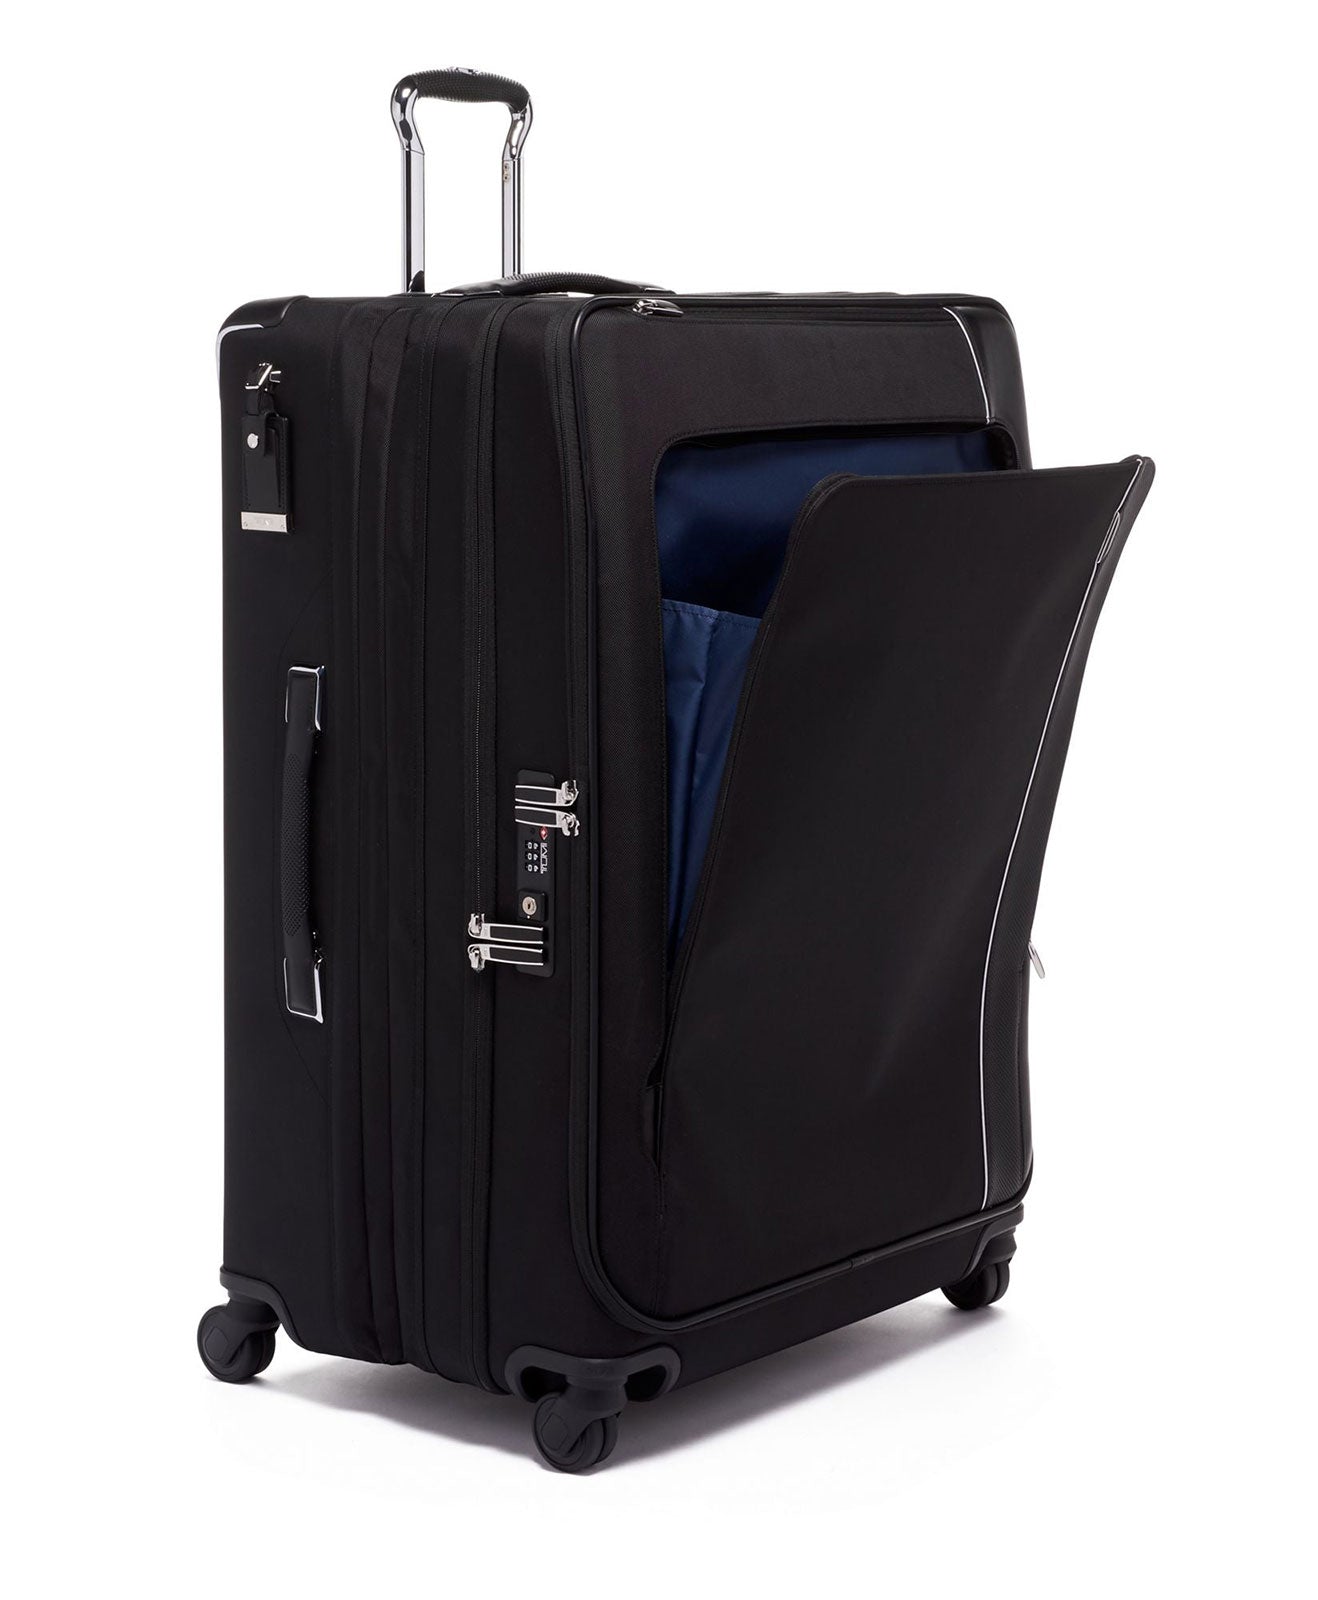 Tumi Extended Trip Dual Access 4 Wheeled Packing Case, Black